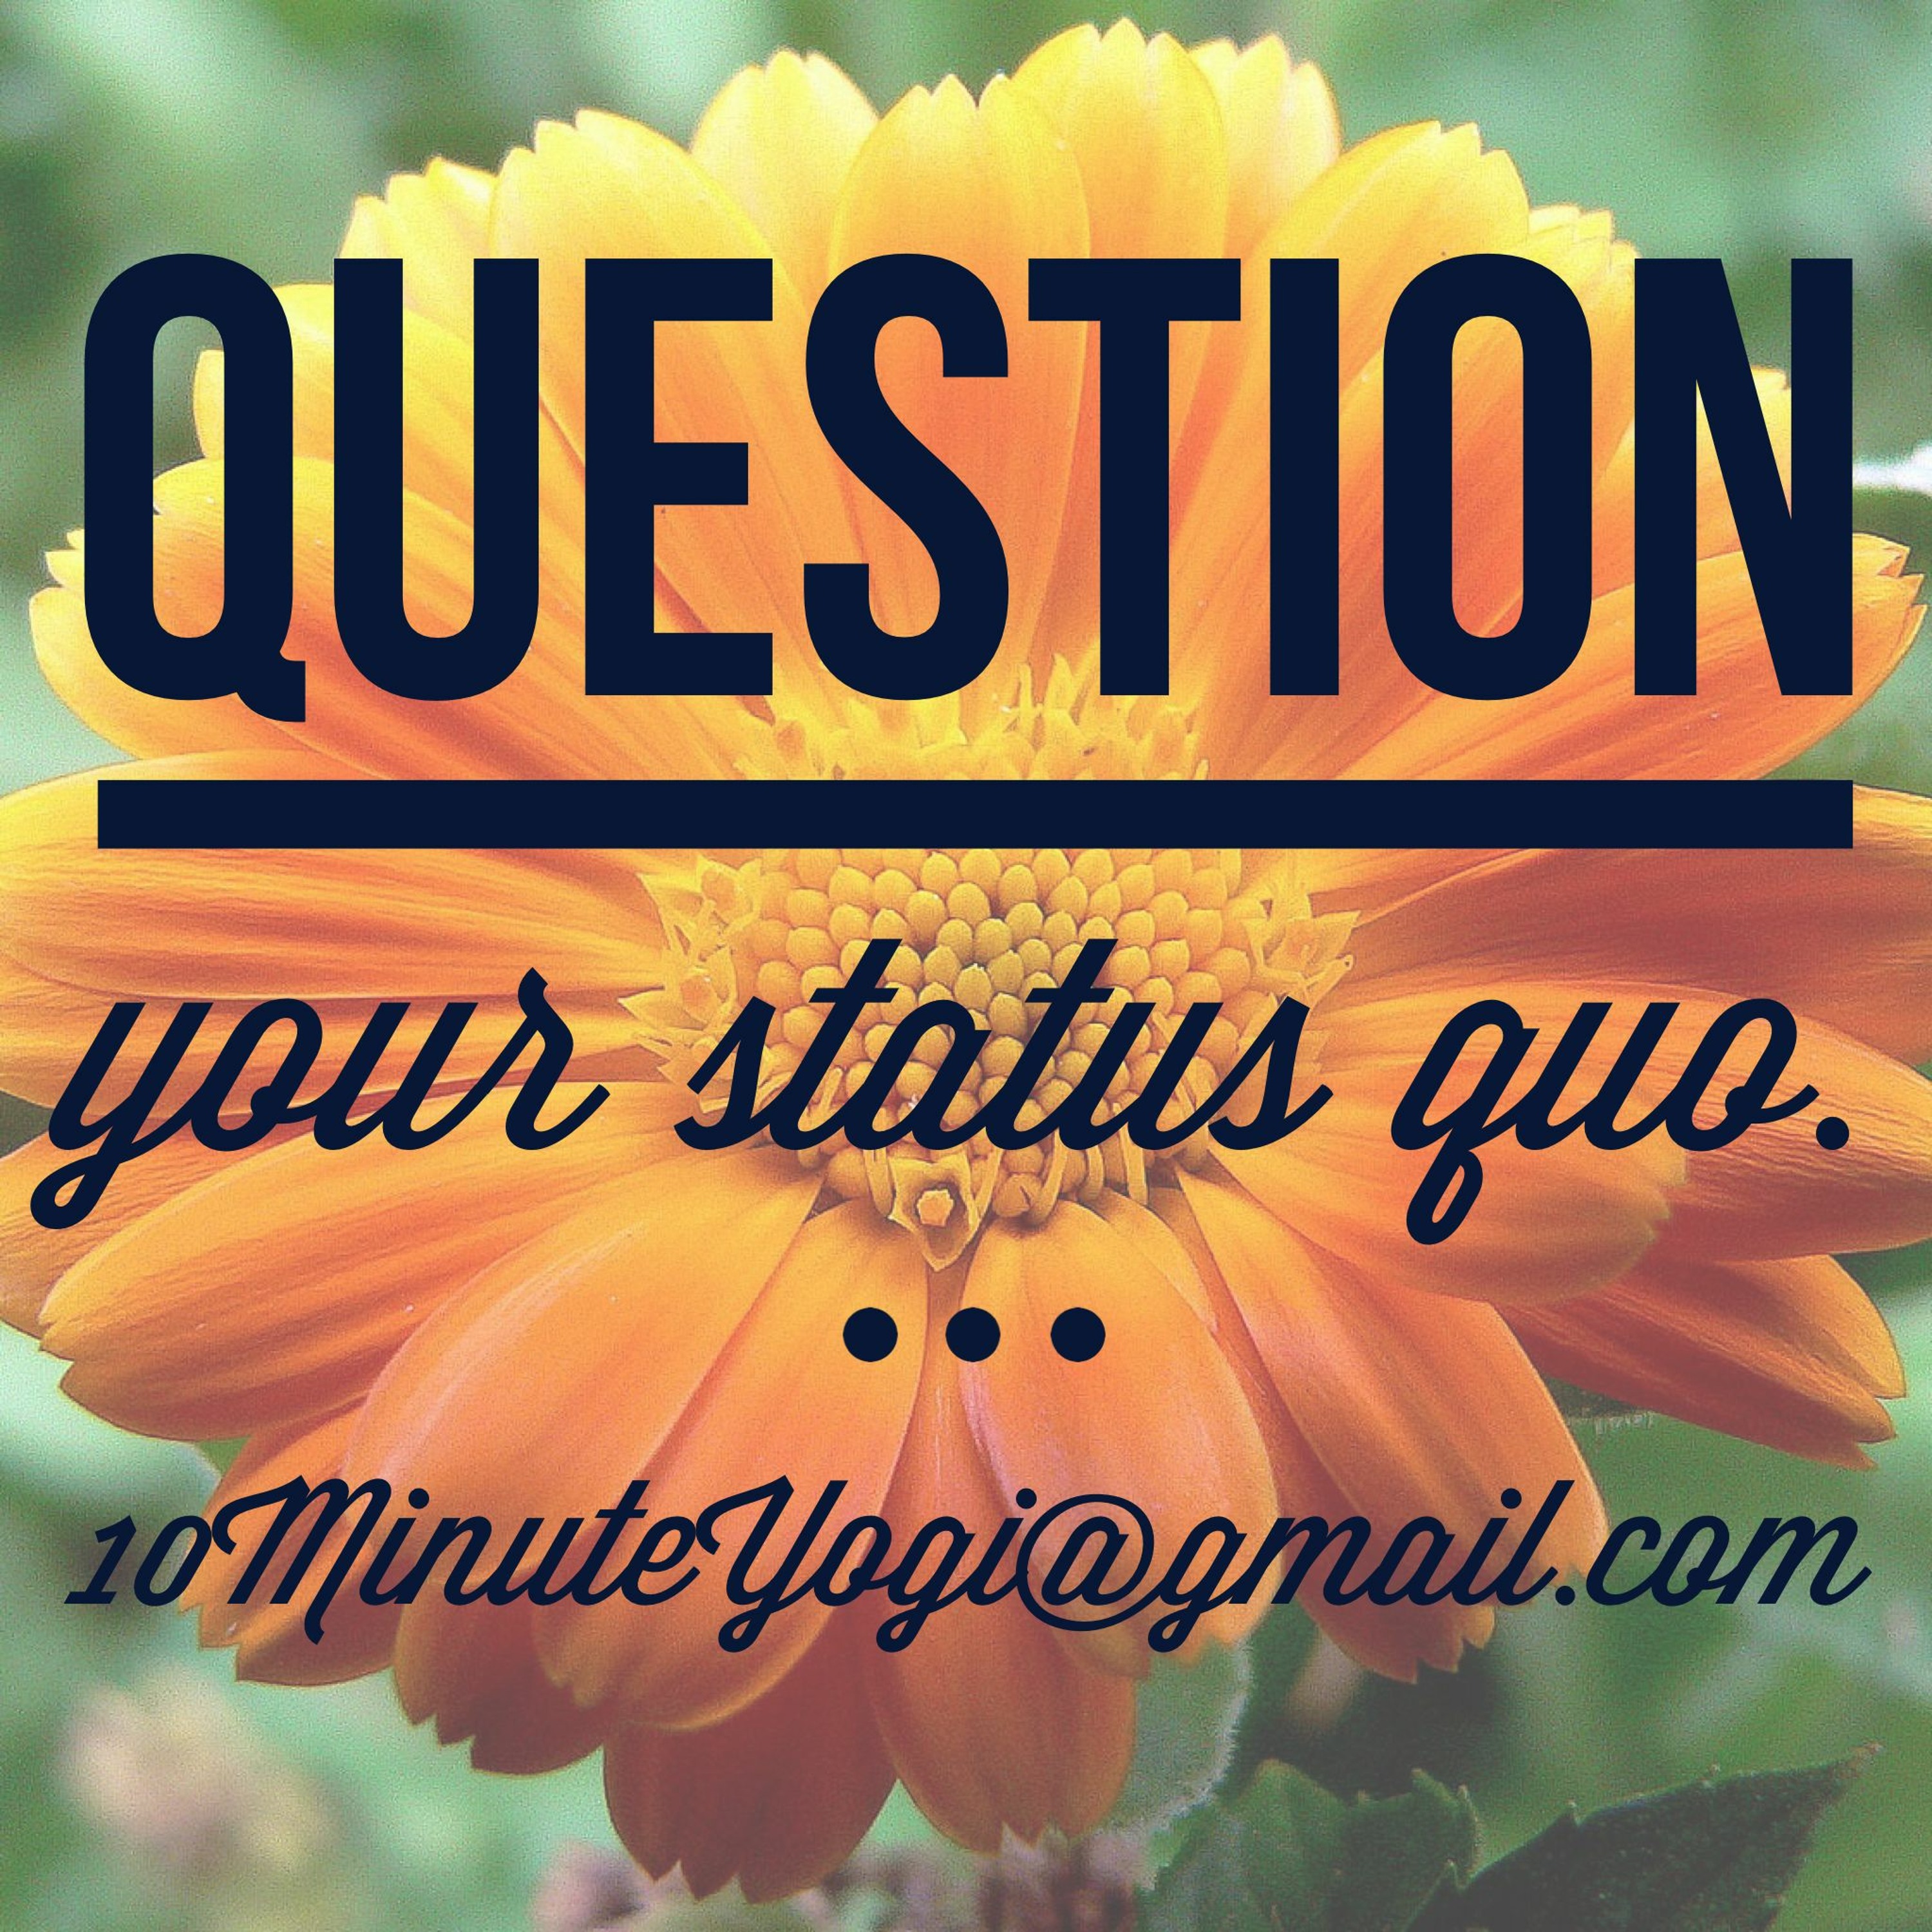 Question the Status Quo